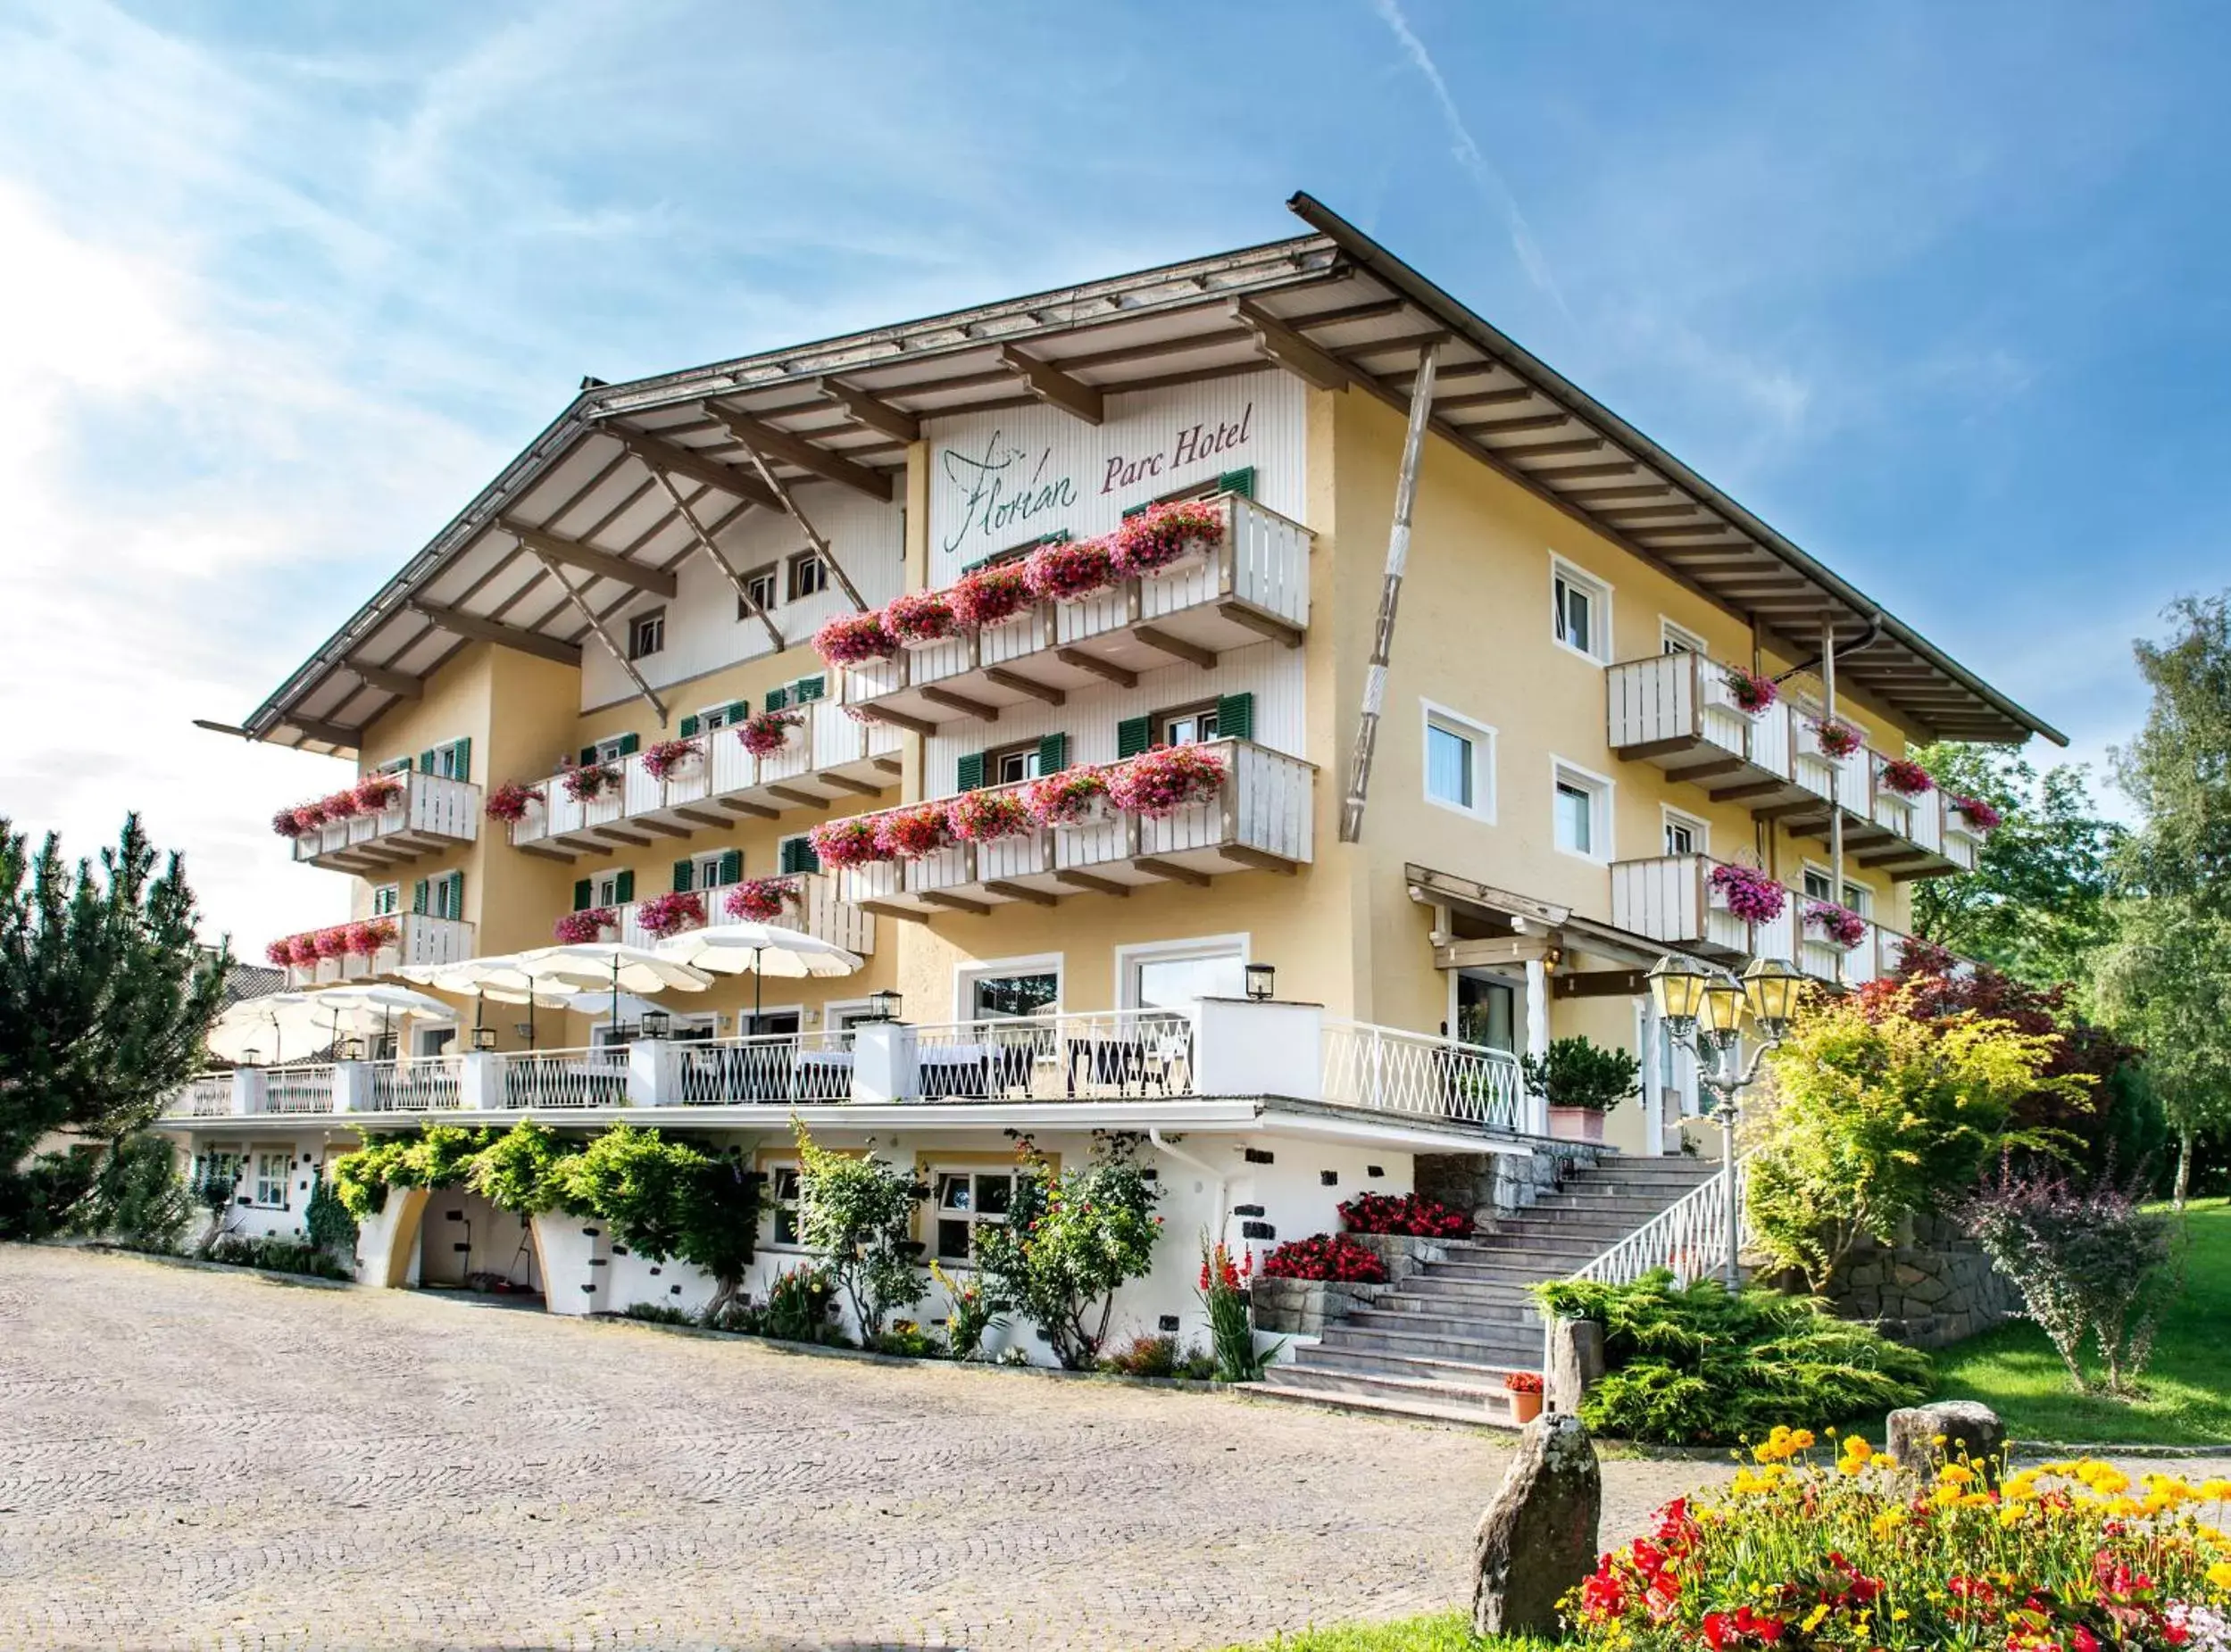 Property Building in Parc Hotel Florian